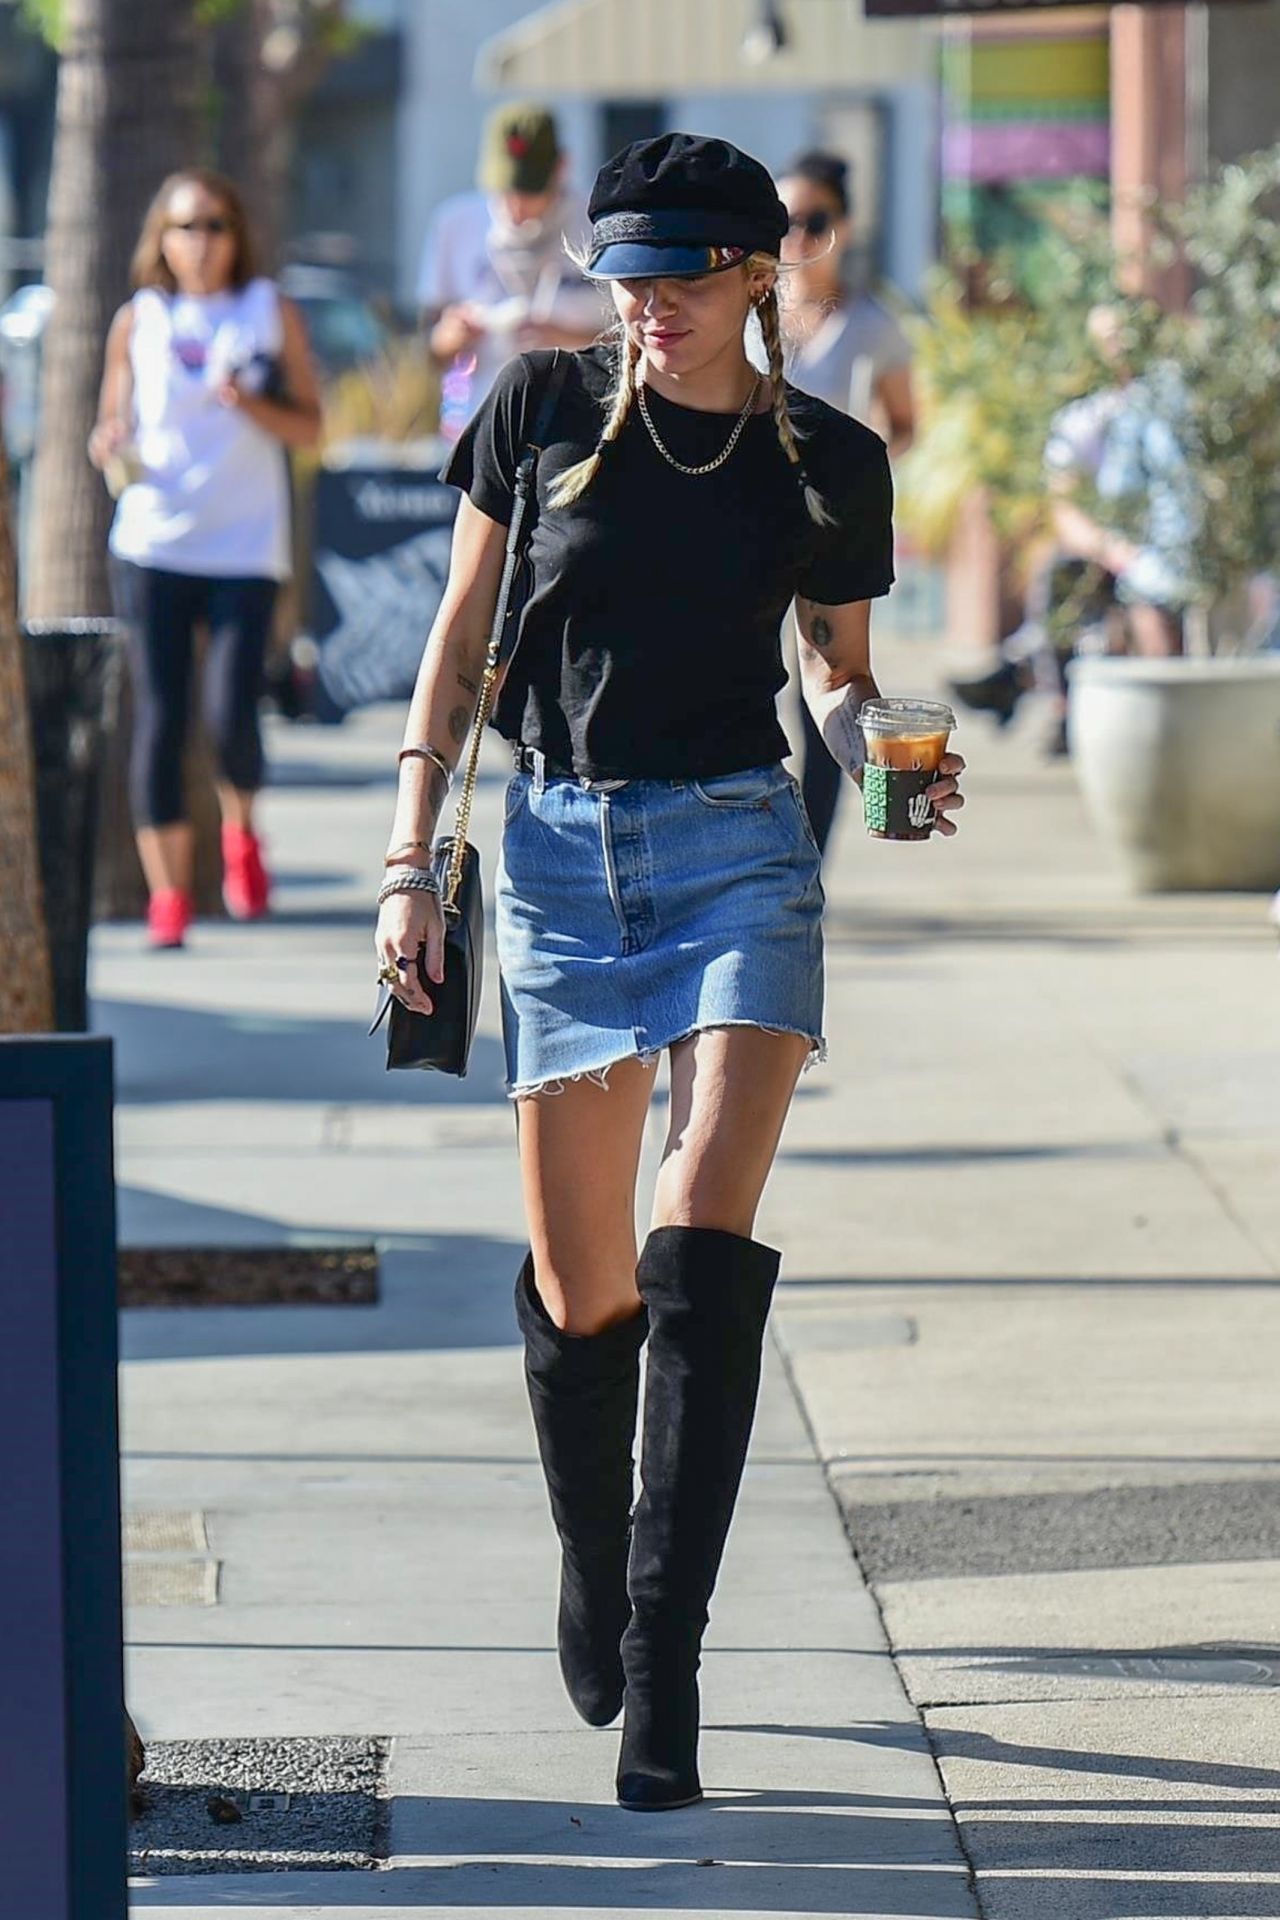 skirt with knee high boots